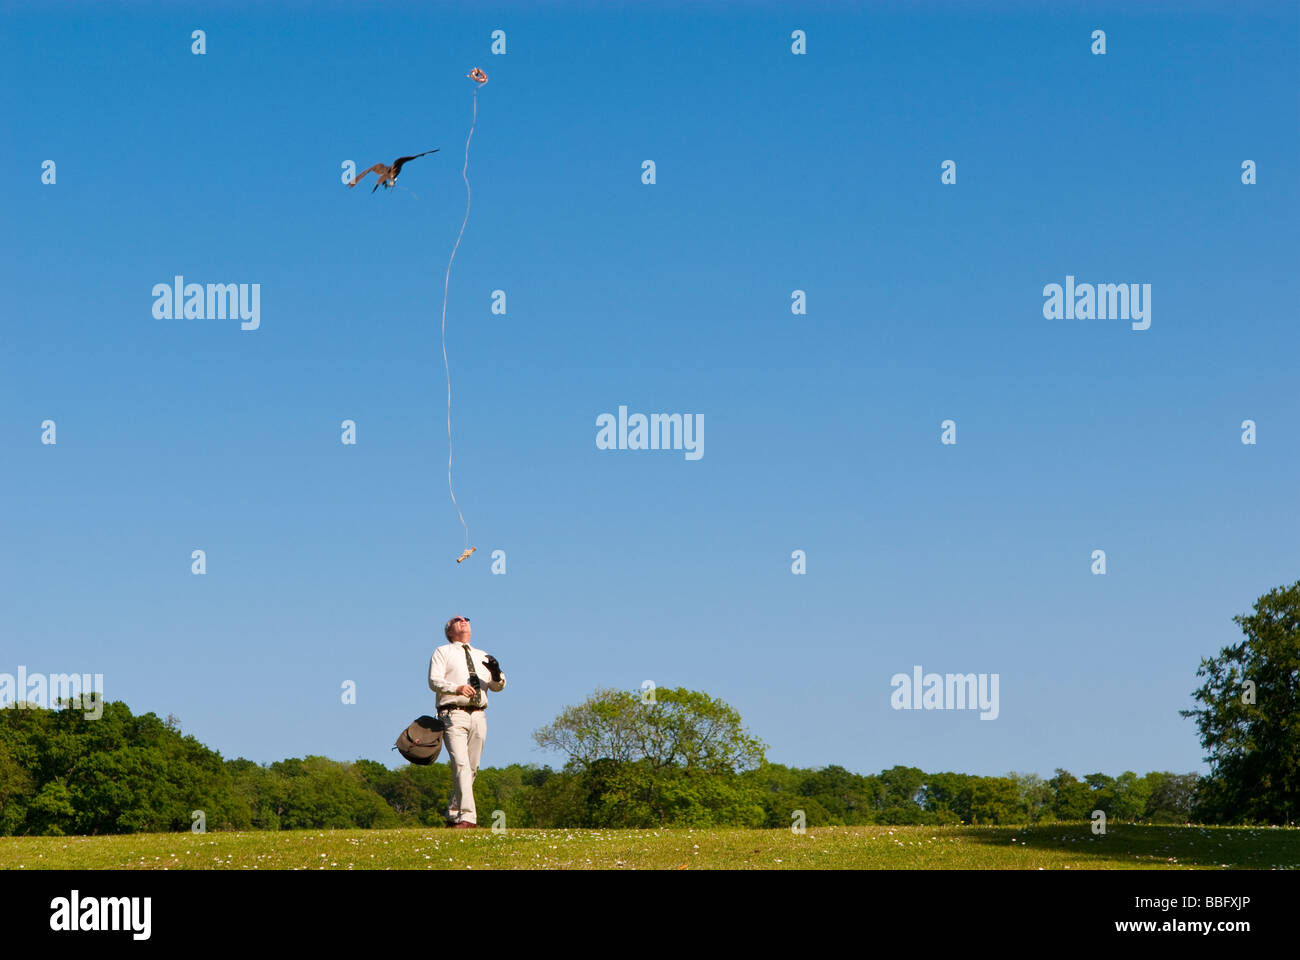 A falconer giving a falconry display to the public,attracting the birds of prey to fly past using a lure in the uk countryside Stock Photo